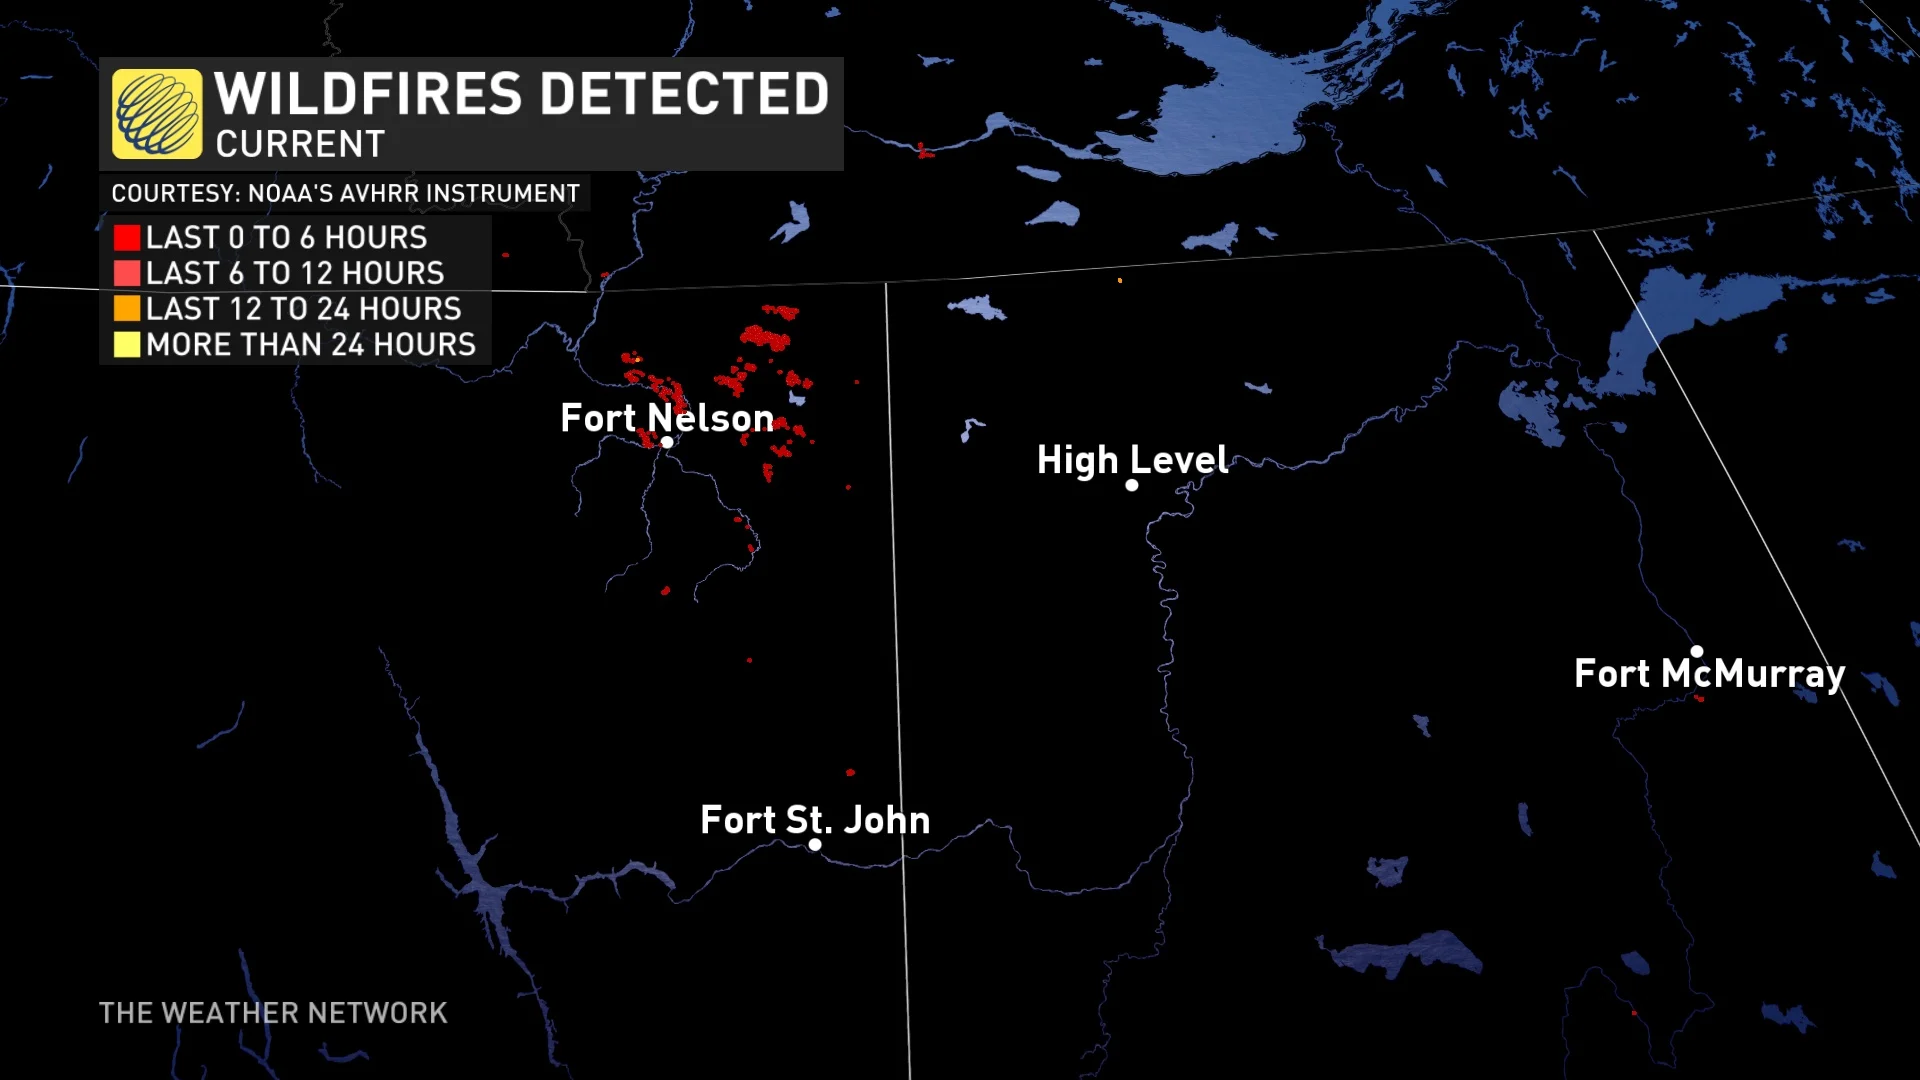 LATEST WILDFIRES DETECTED_MAY 13